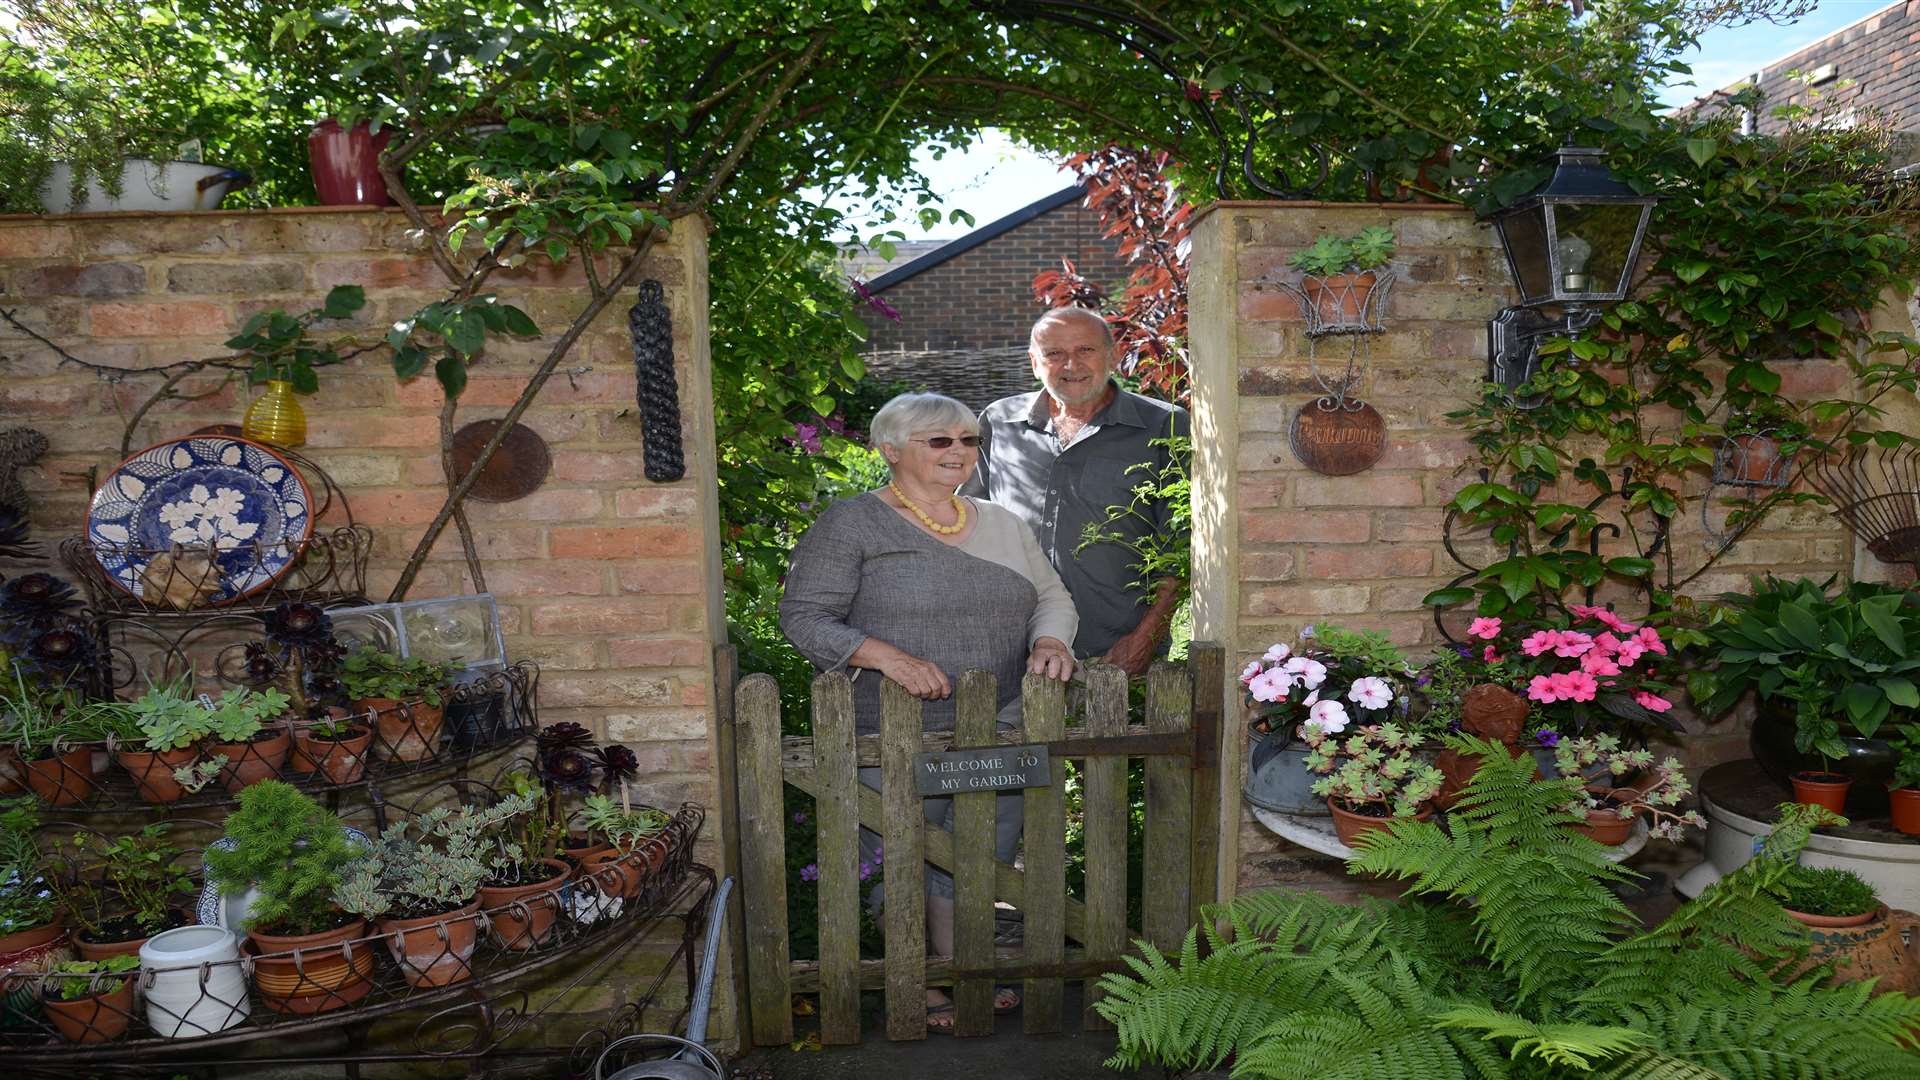 Lyn Freeman and Barry Popple Gleaners garden in George Alley, Deal